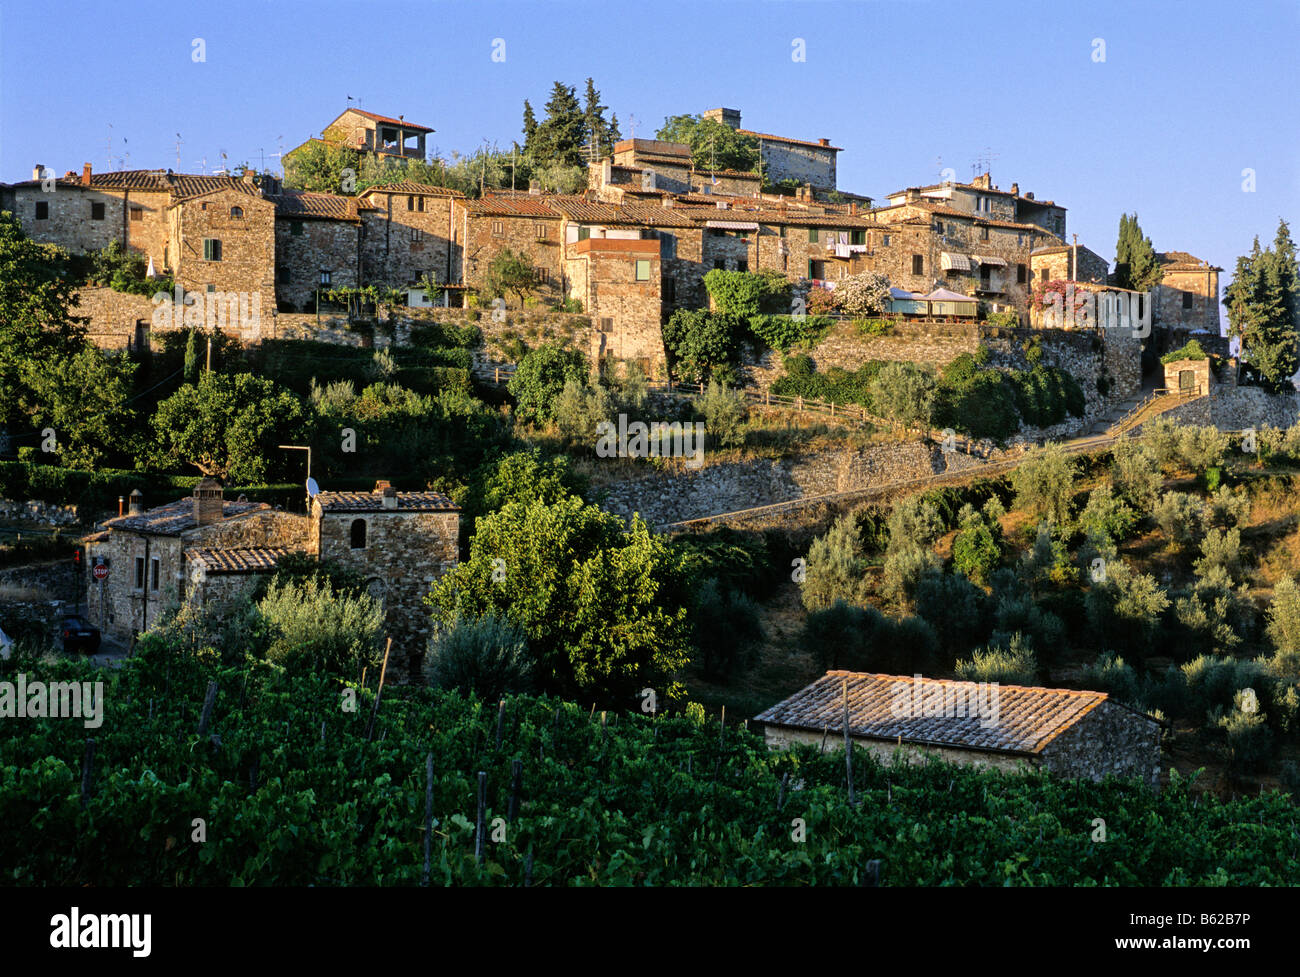 Wine producing village of Montefioralle, Chianti, Province of Florence or Firenze, Tuscany, Italy, Europe Stock Photo